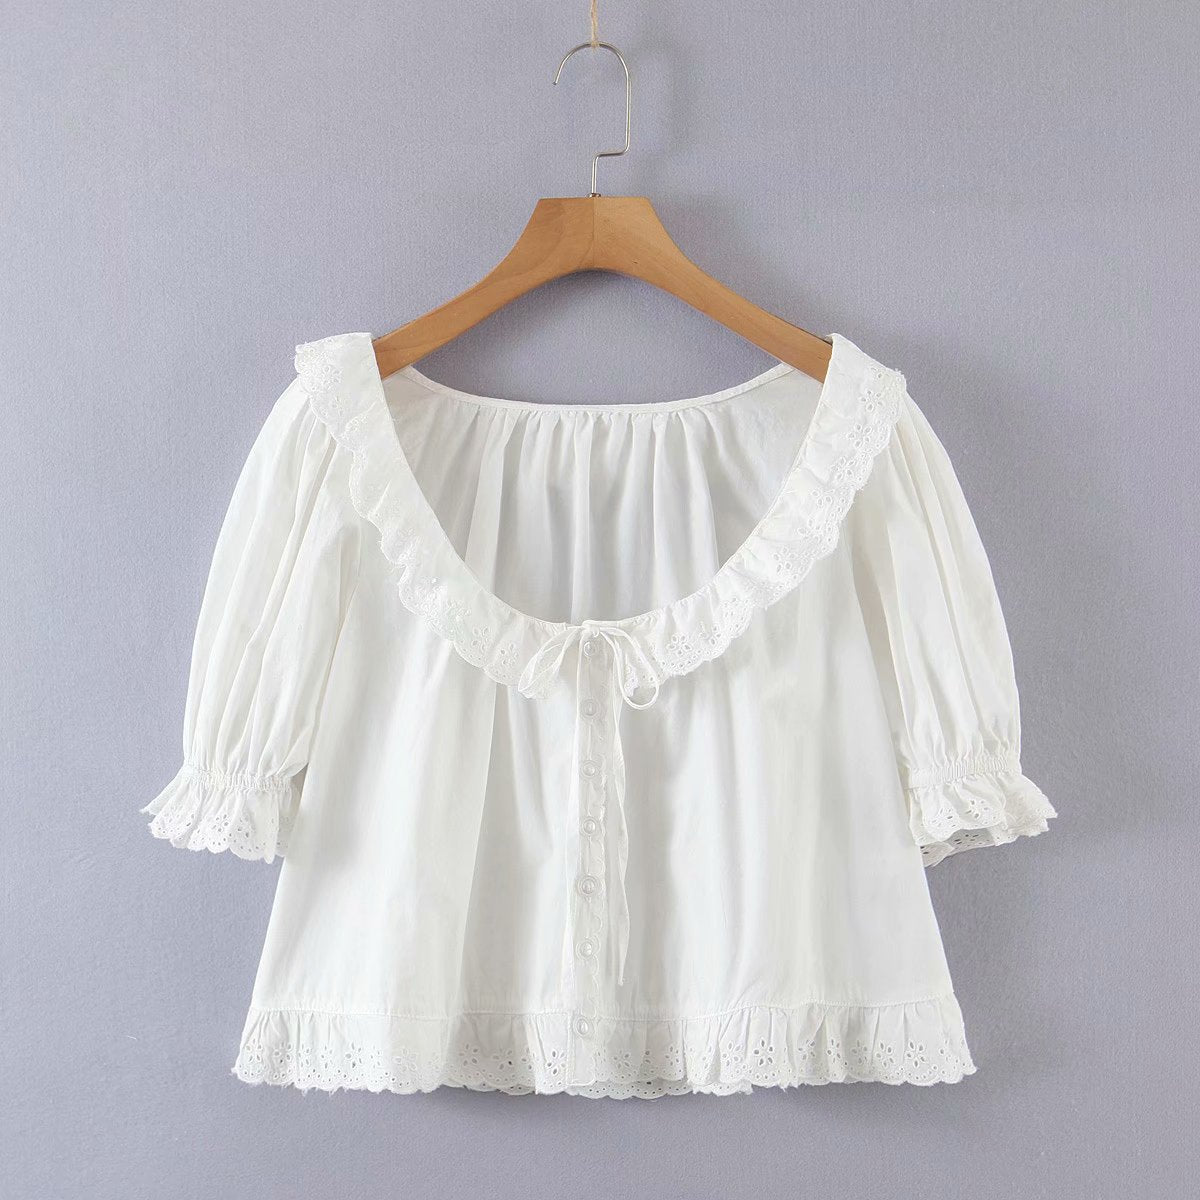 Chicdear Ruffles Trim V-Neck Women's Blouse Cotton Embroidery Hollow Out Lace-Up Ladies Short Puff Sleeve Sweet Shirt And Top 2023 Summer